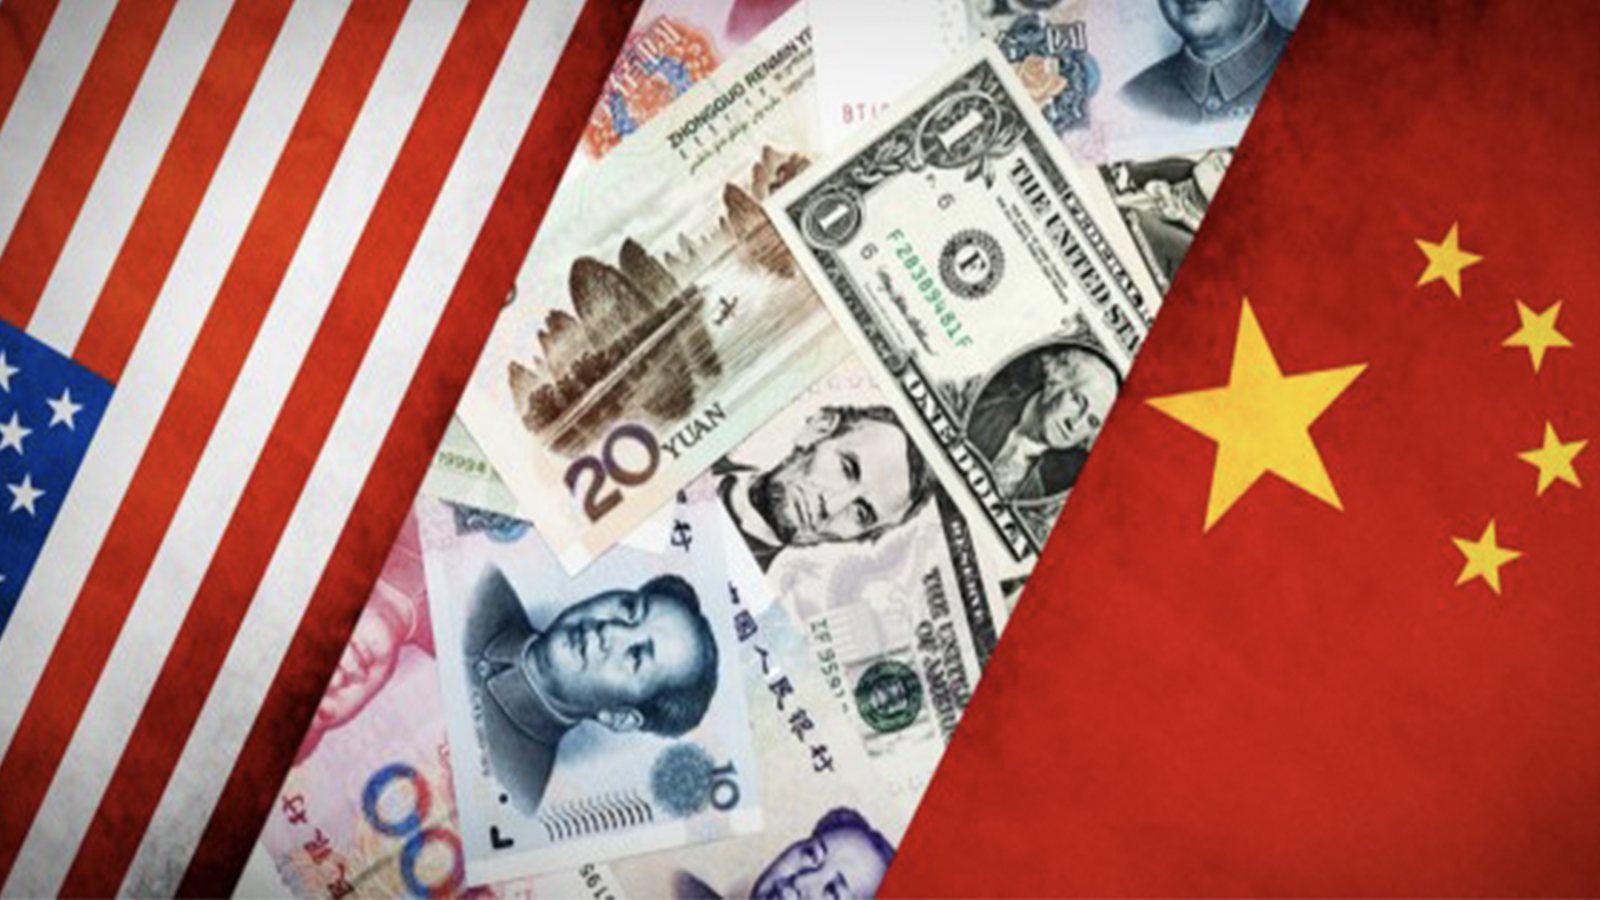 Significant global damage from US-China trade war